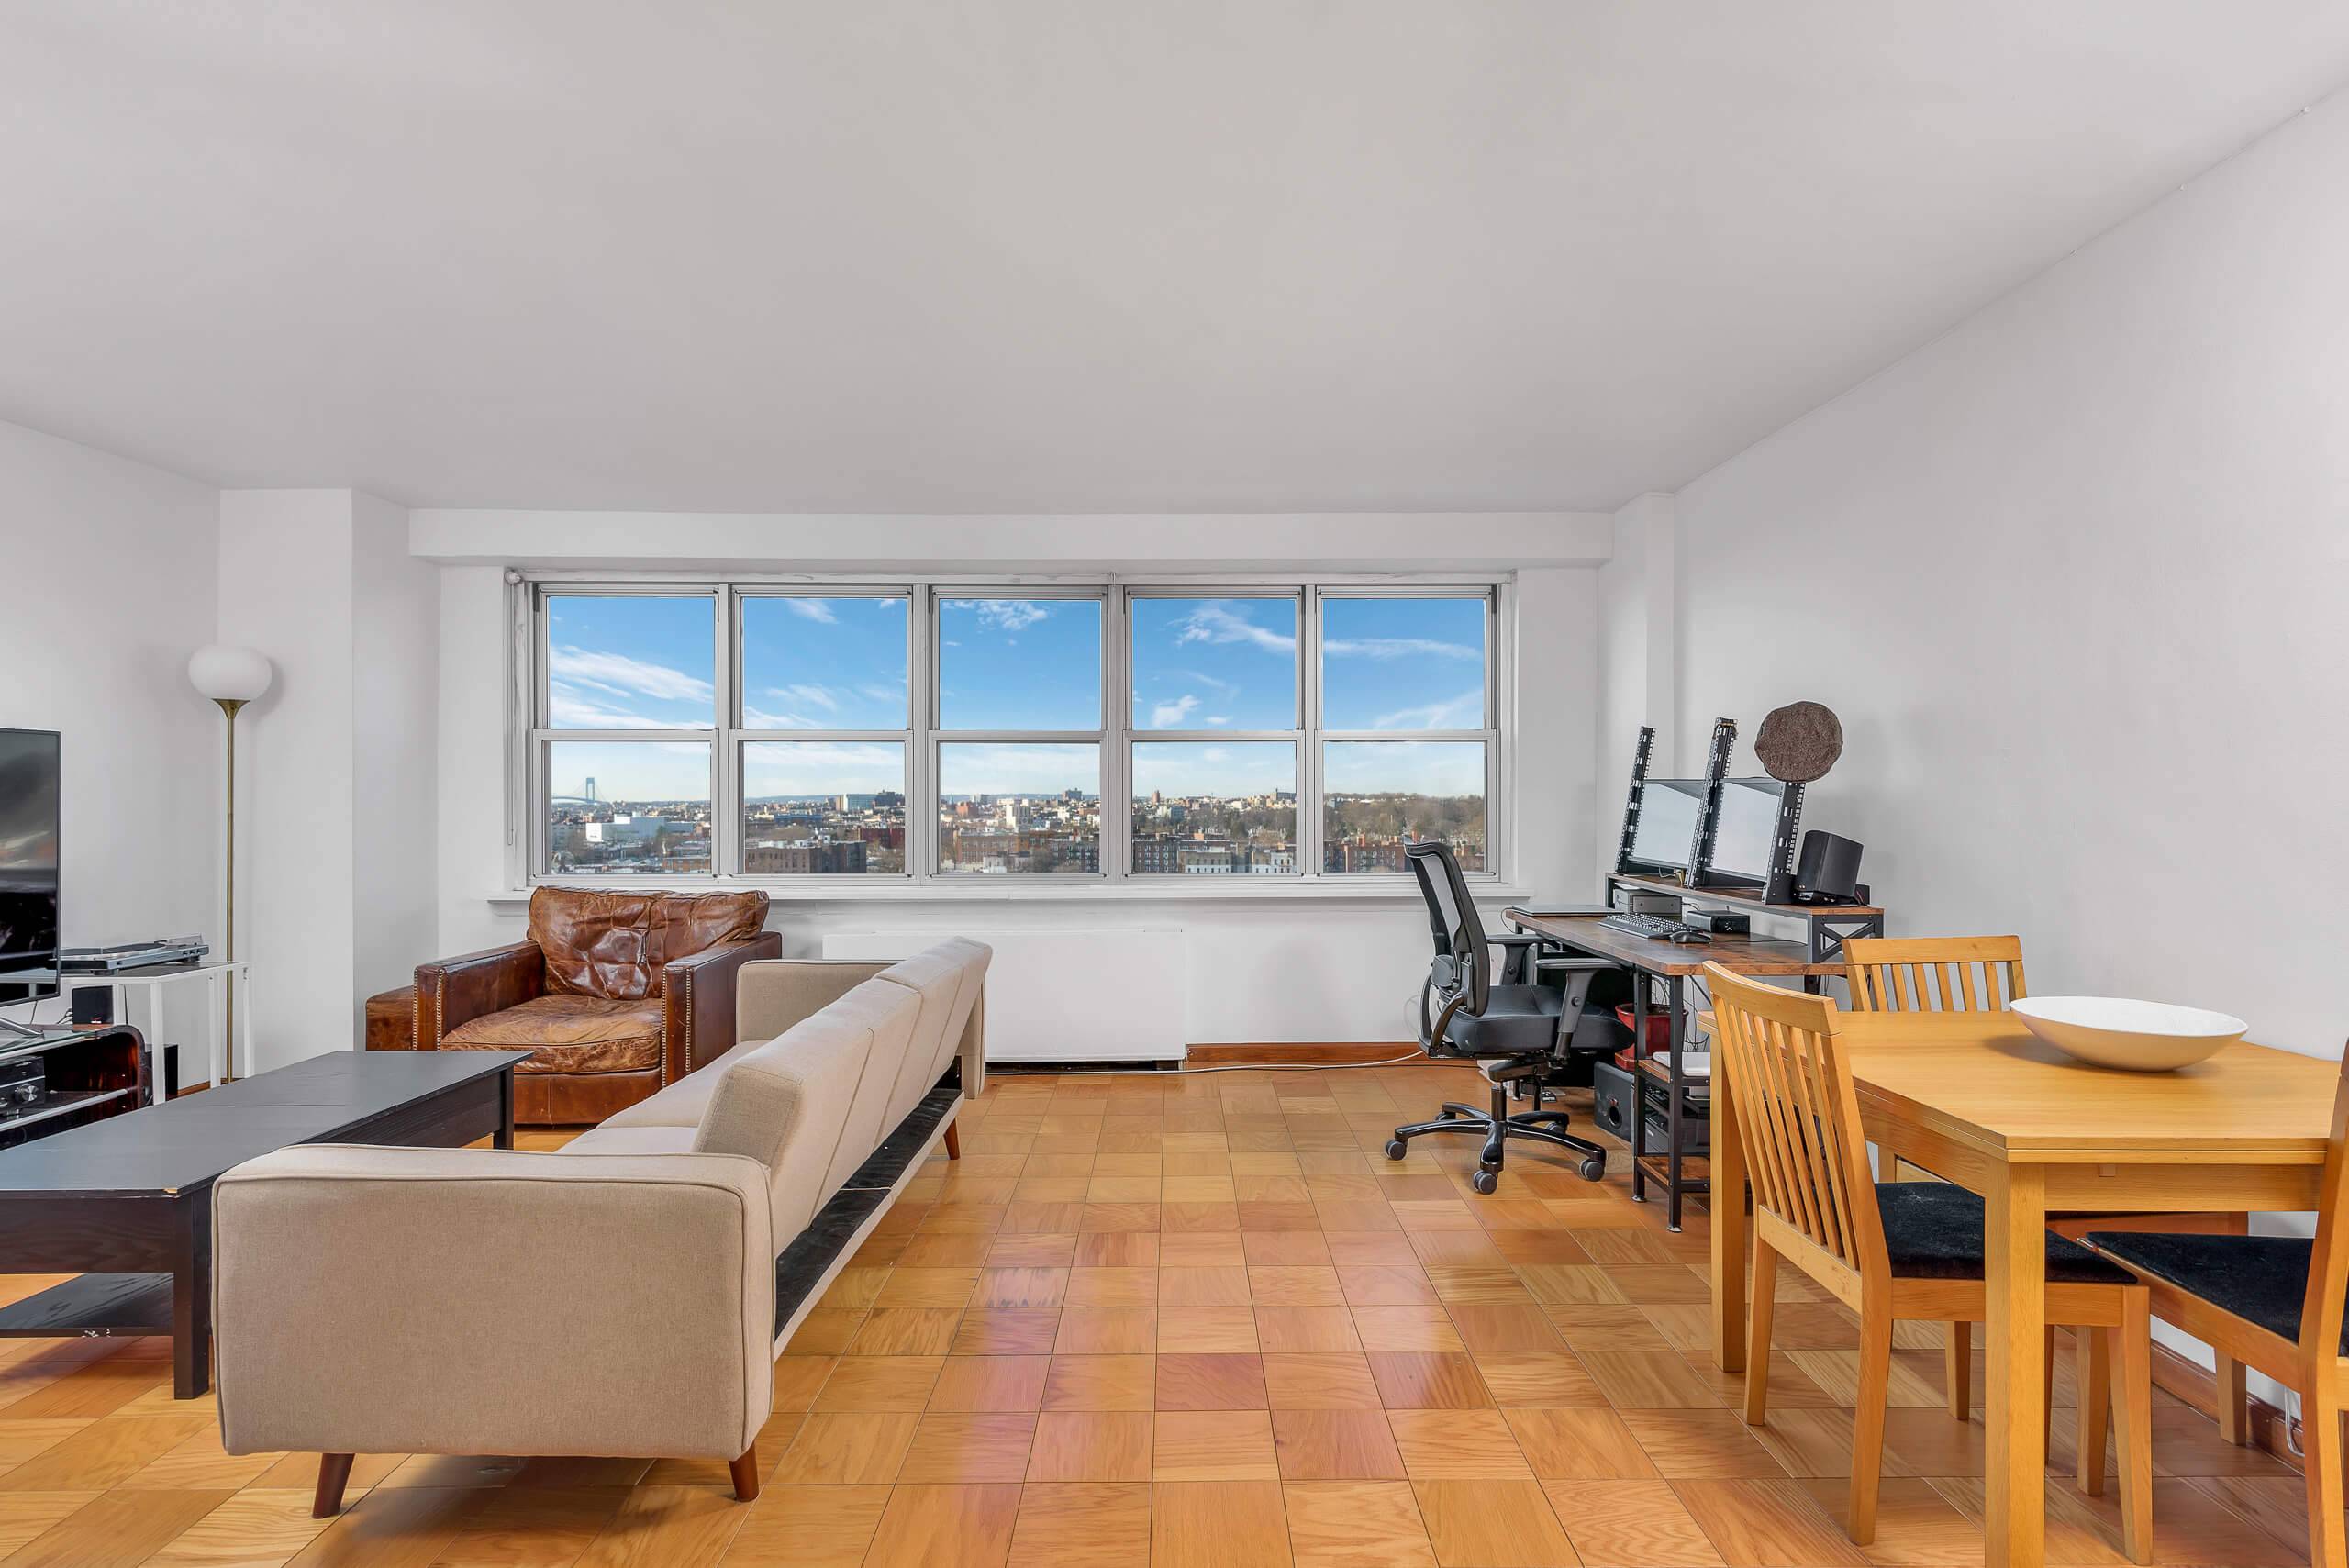 Penthouse 17K is a really great apartment, in the number one building in the neighborhood.